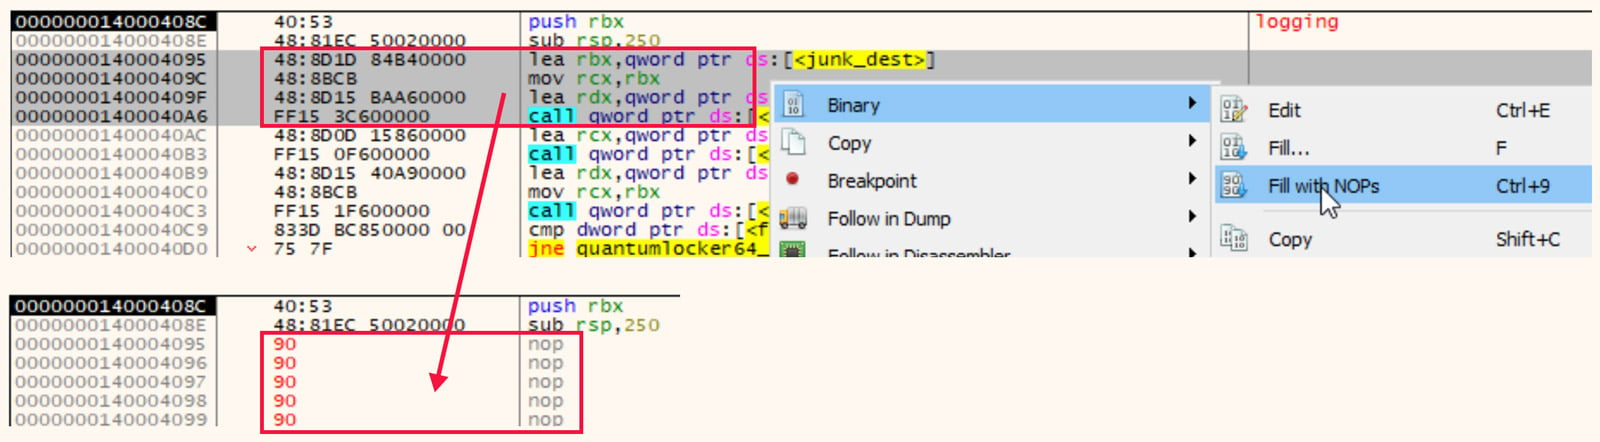 Replace debugger evasion with NOPs in x64dbg